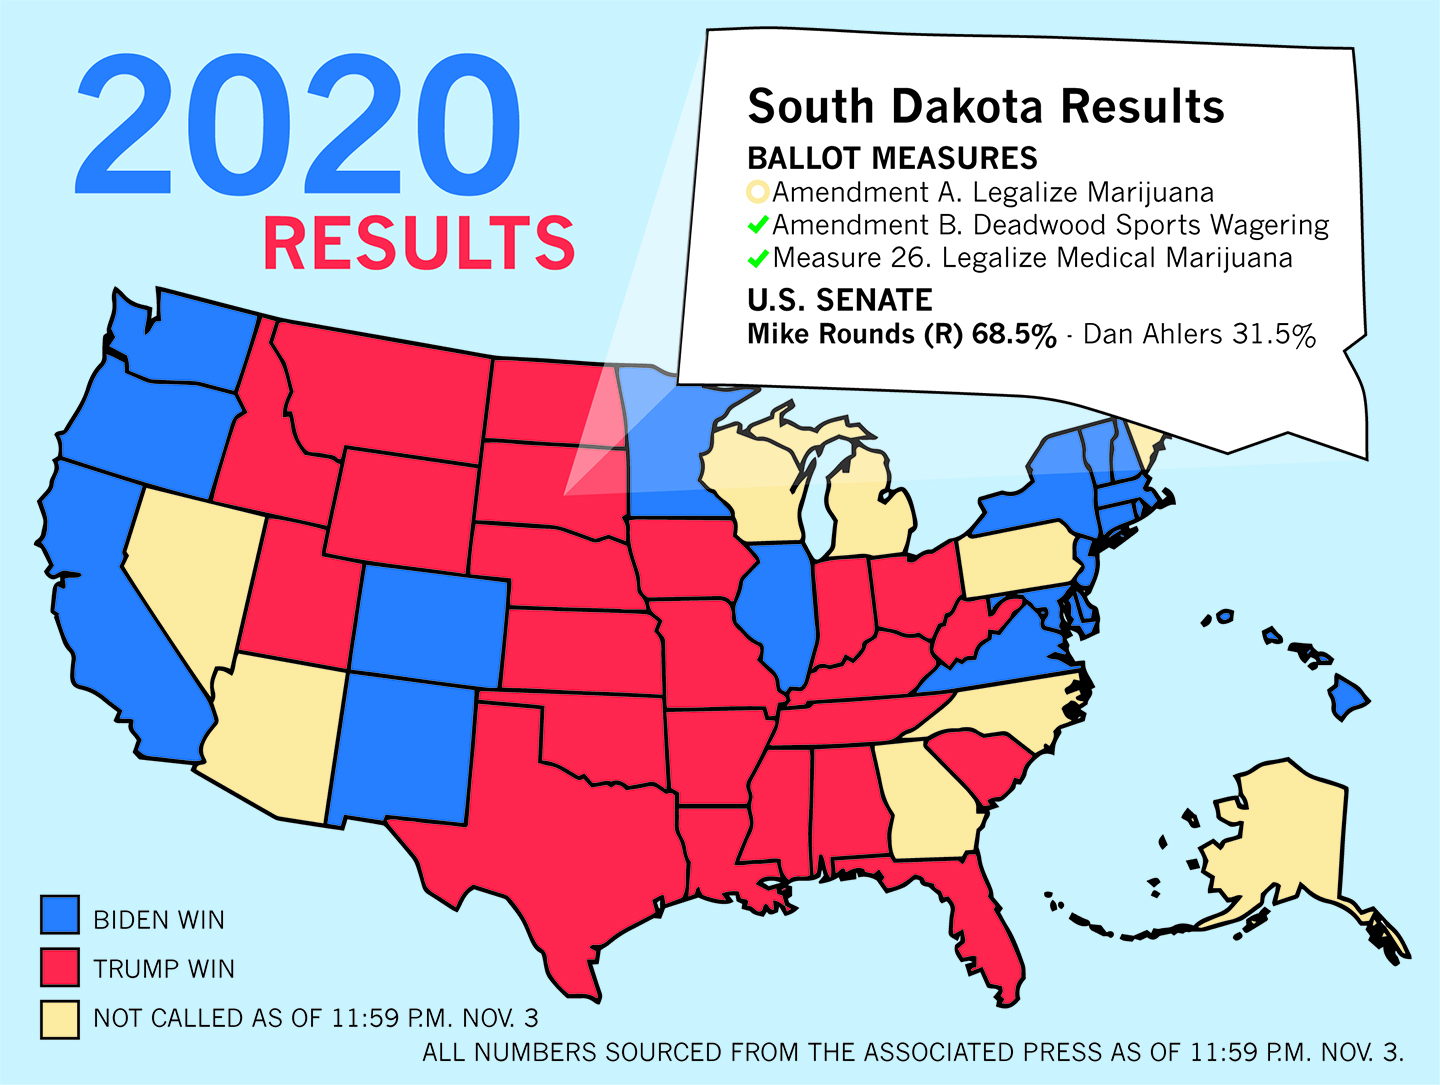 USD students ‘not surprised’ by South Dakota election